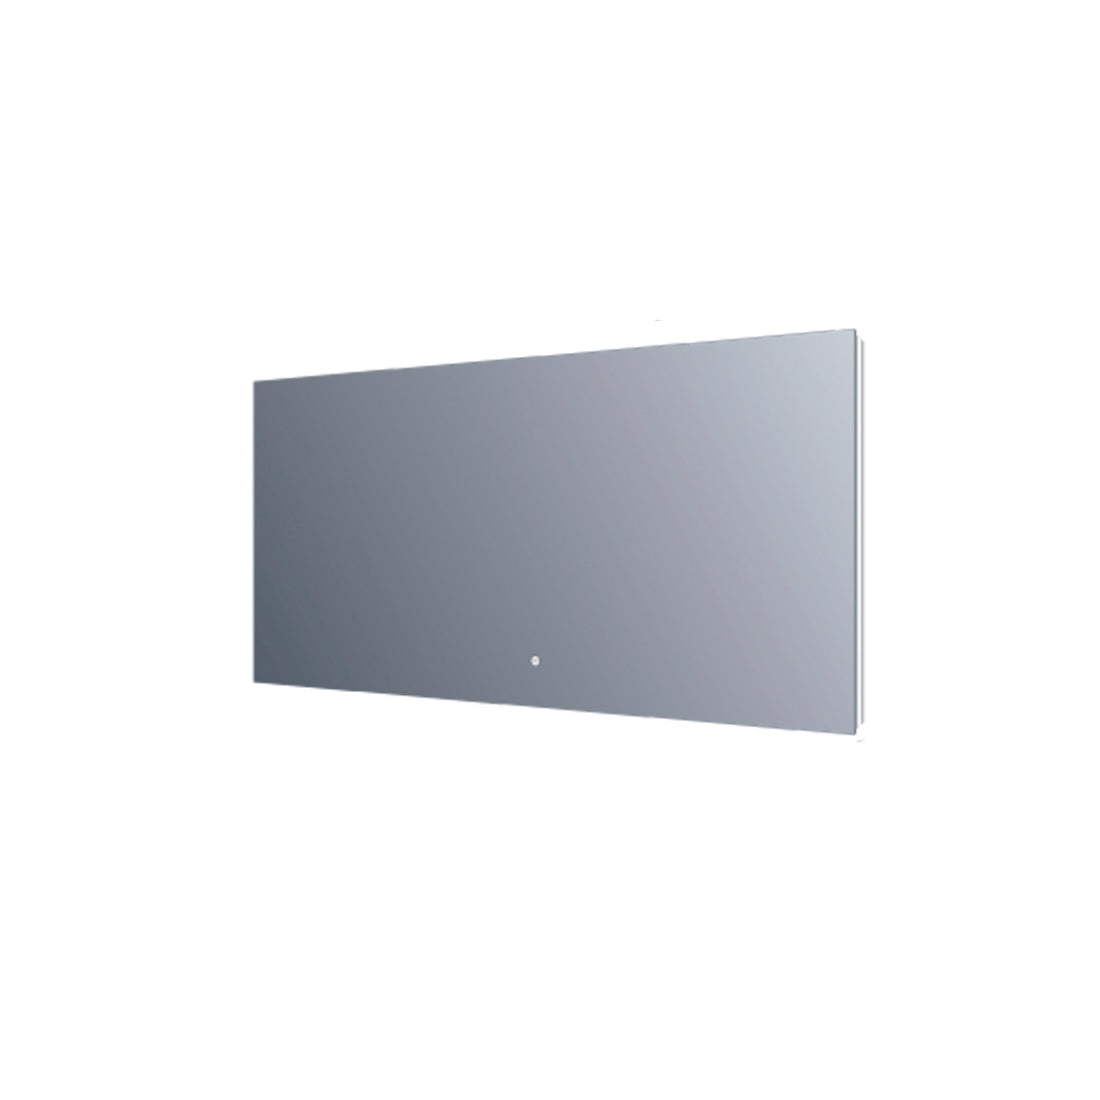 DAX 48" Led Mirror - Reflected light - touch sensor switch - 5000k - 48" x 24" (DAX-DL03C-12060)